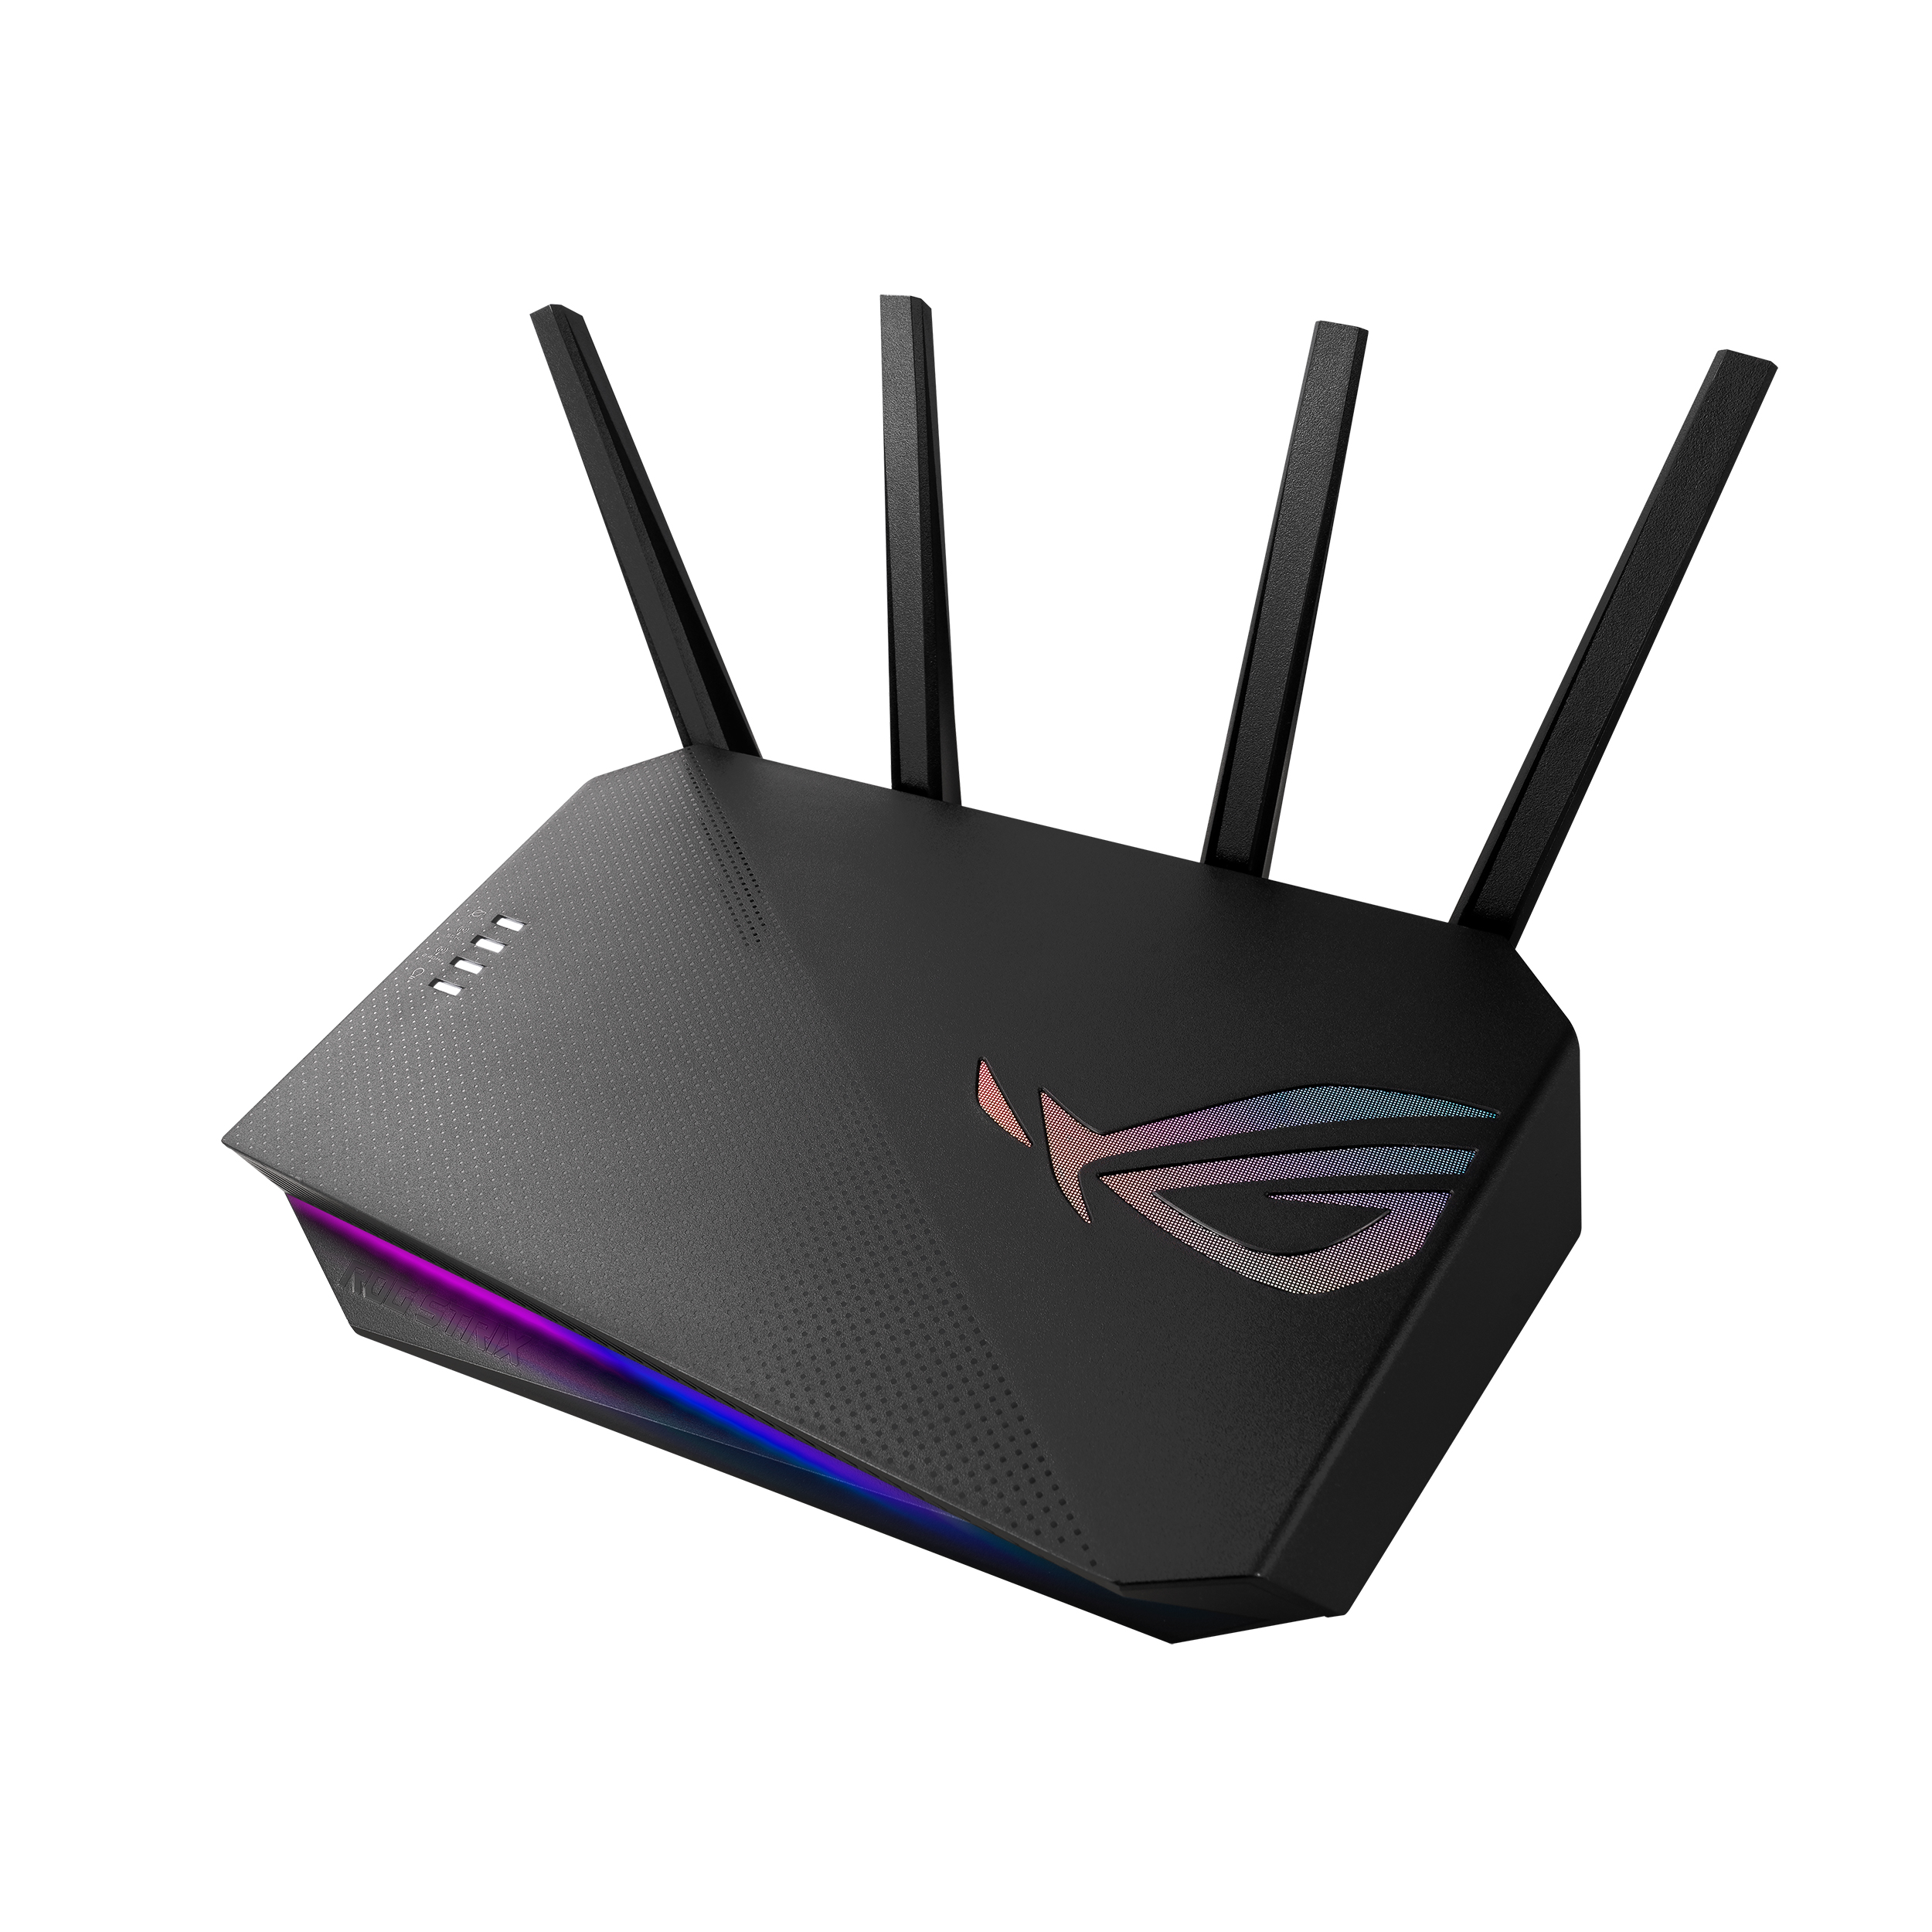 (YMMV) Walmart ASUS ROG Router Clearance: GS-AX3000 as low as $59.70; GS-AX5400 as low as $75.90